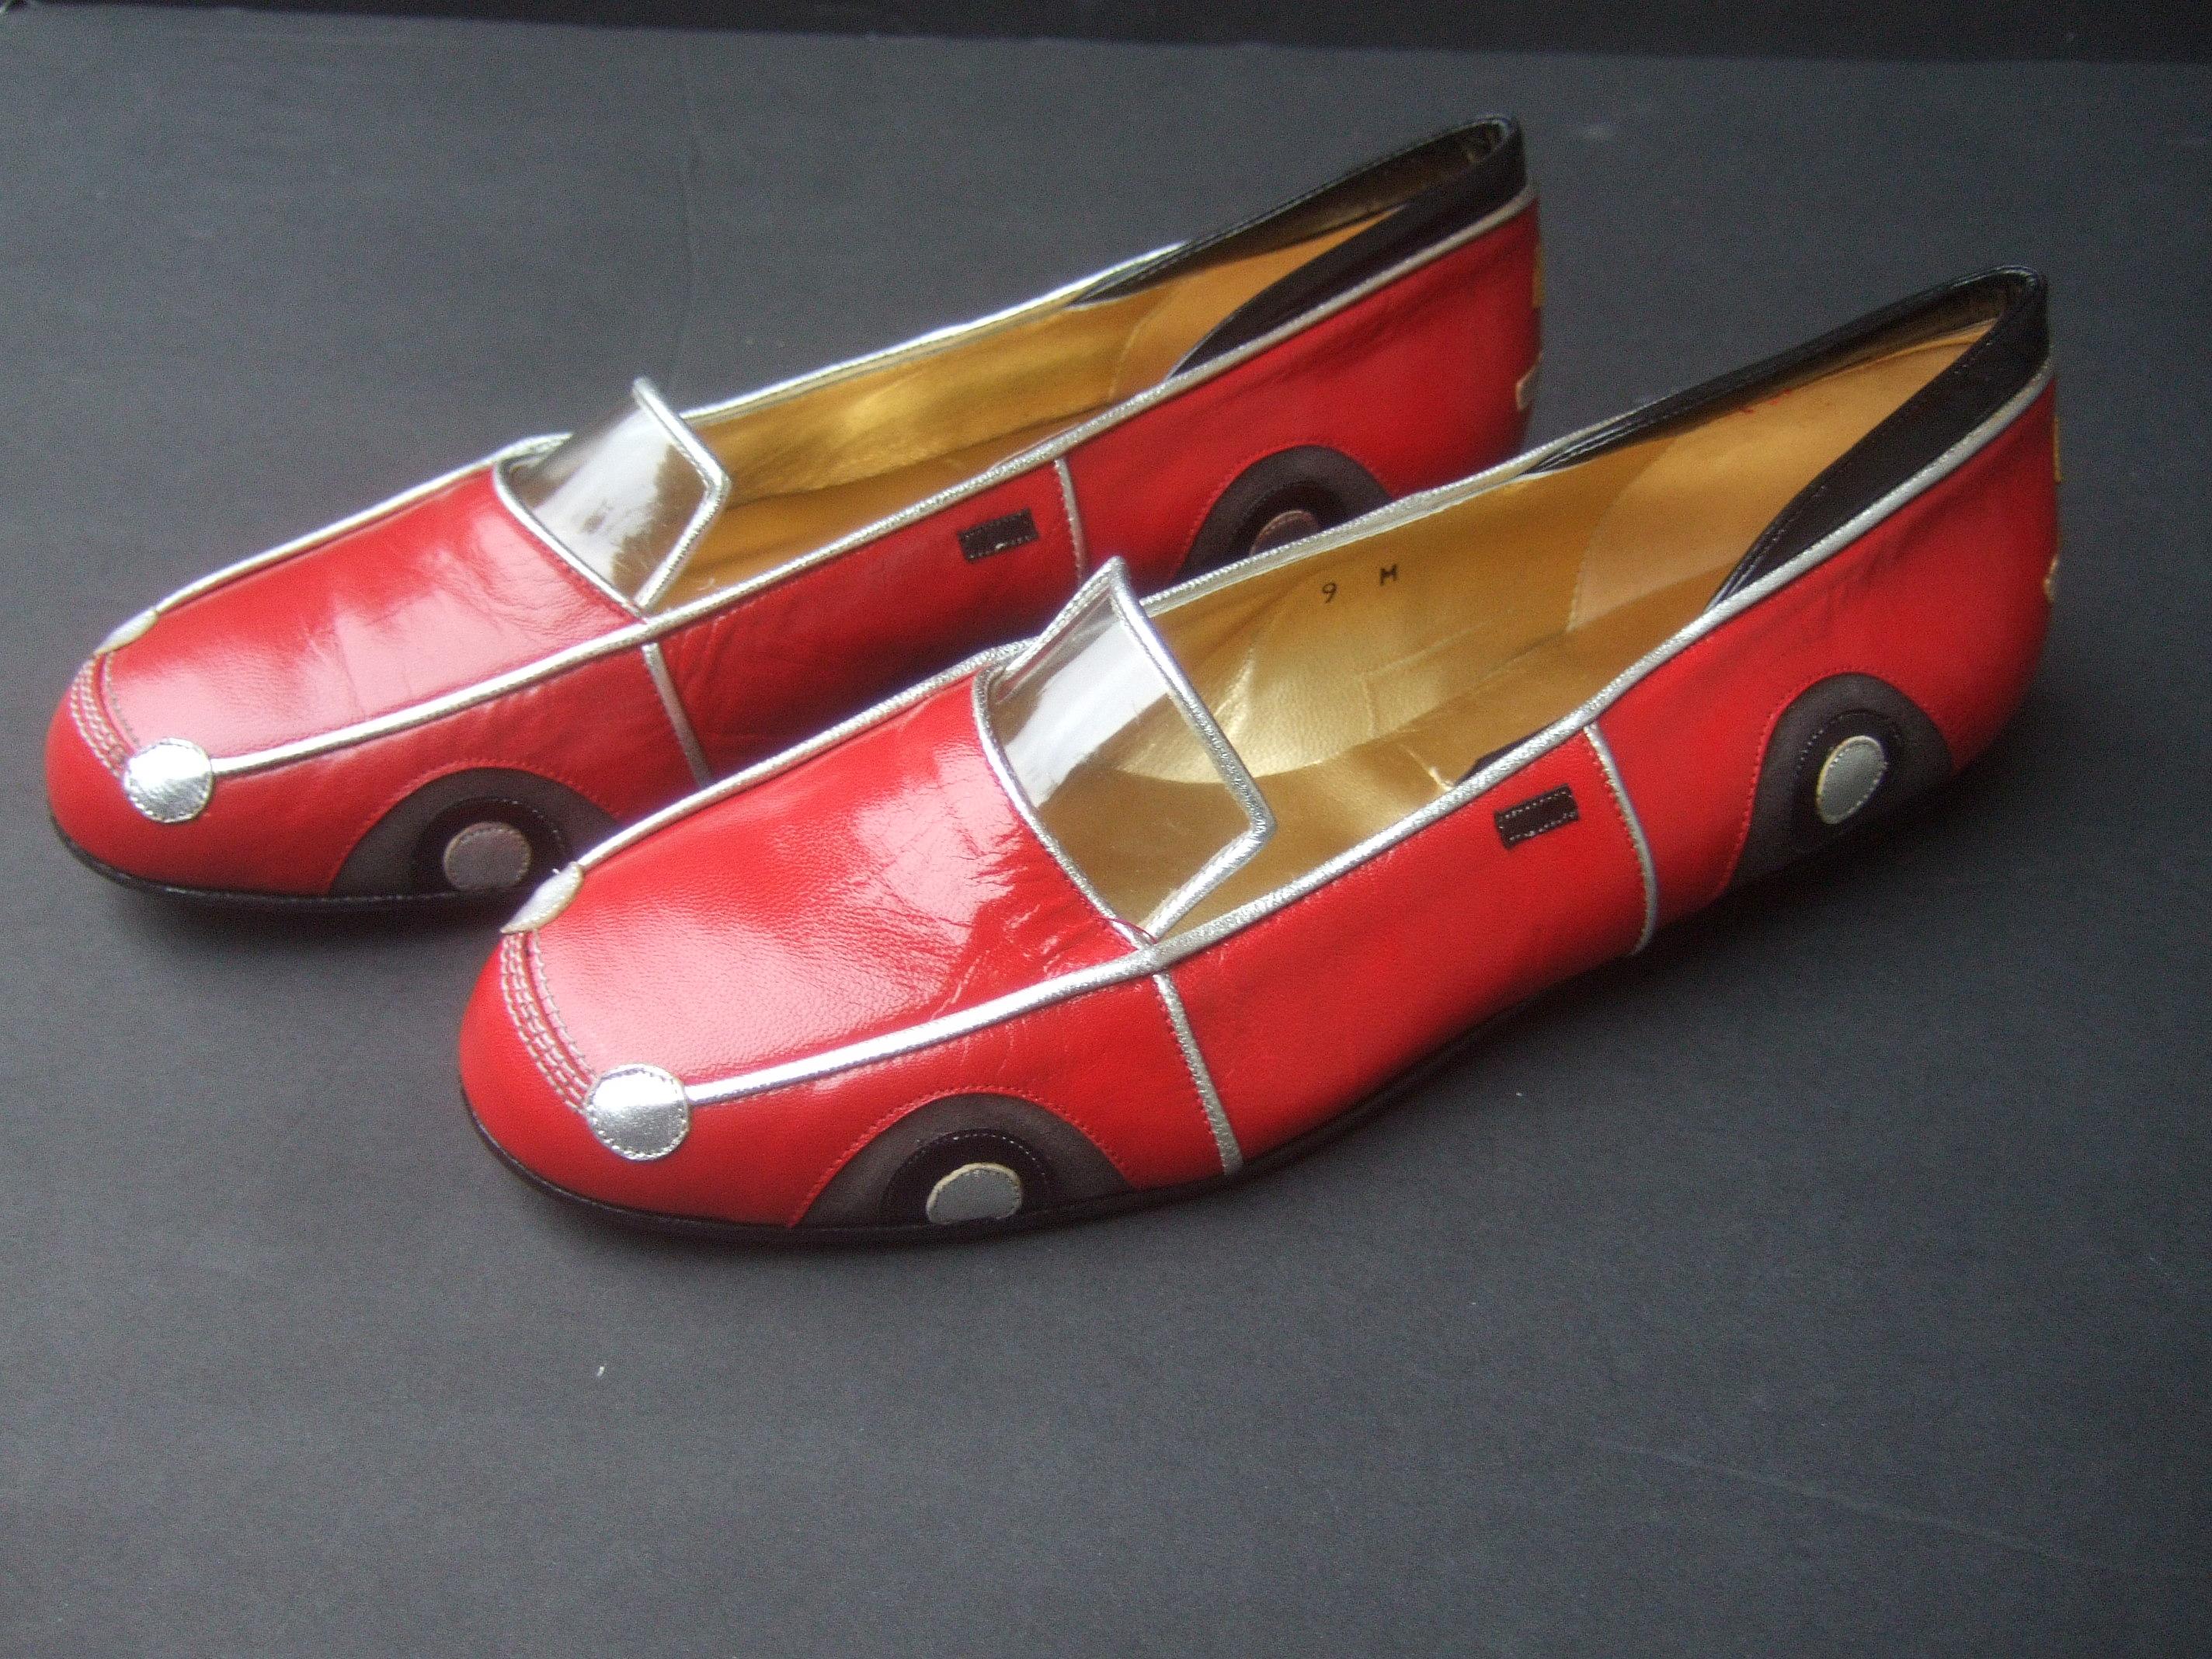 Women's Whimsical Red Leather Sports Car Design Shoes by Zalo US Size 9 M c 1990